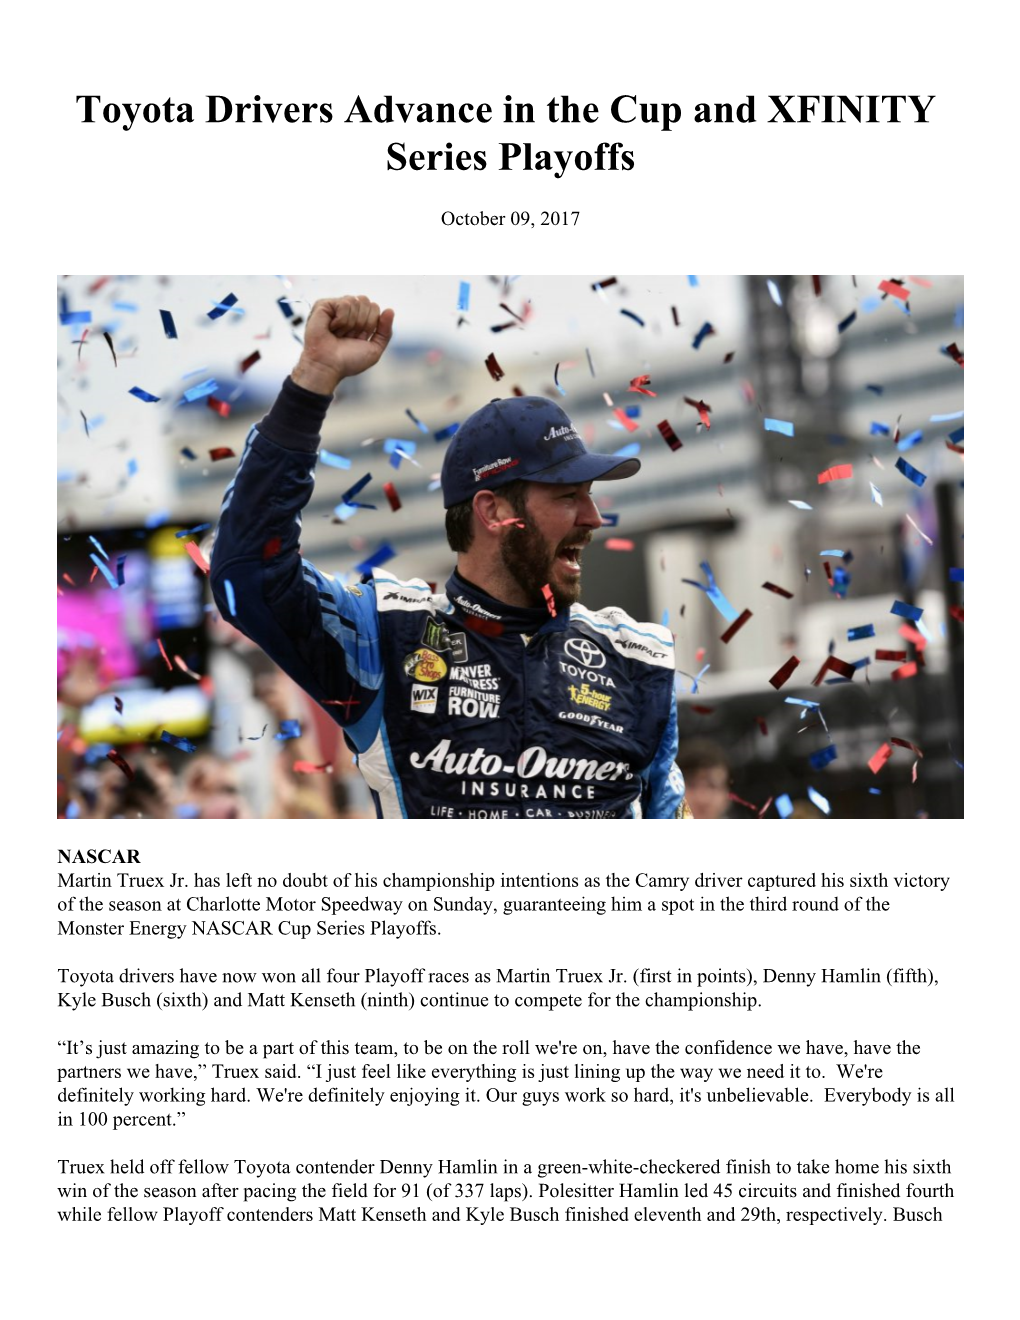 Toyota Drivers Advance in the Cup and XFINITY Series Playoffs